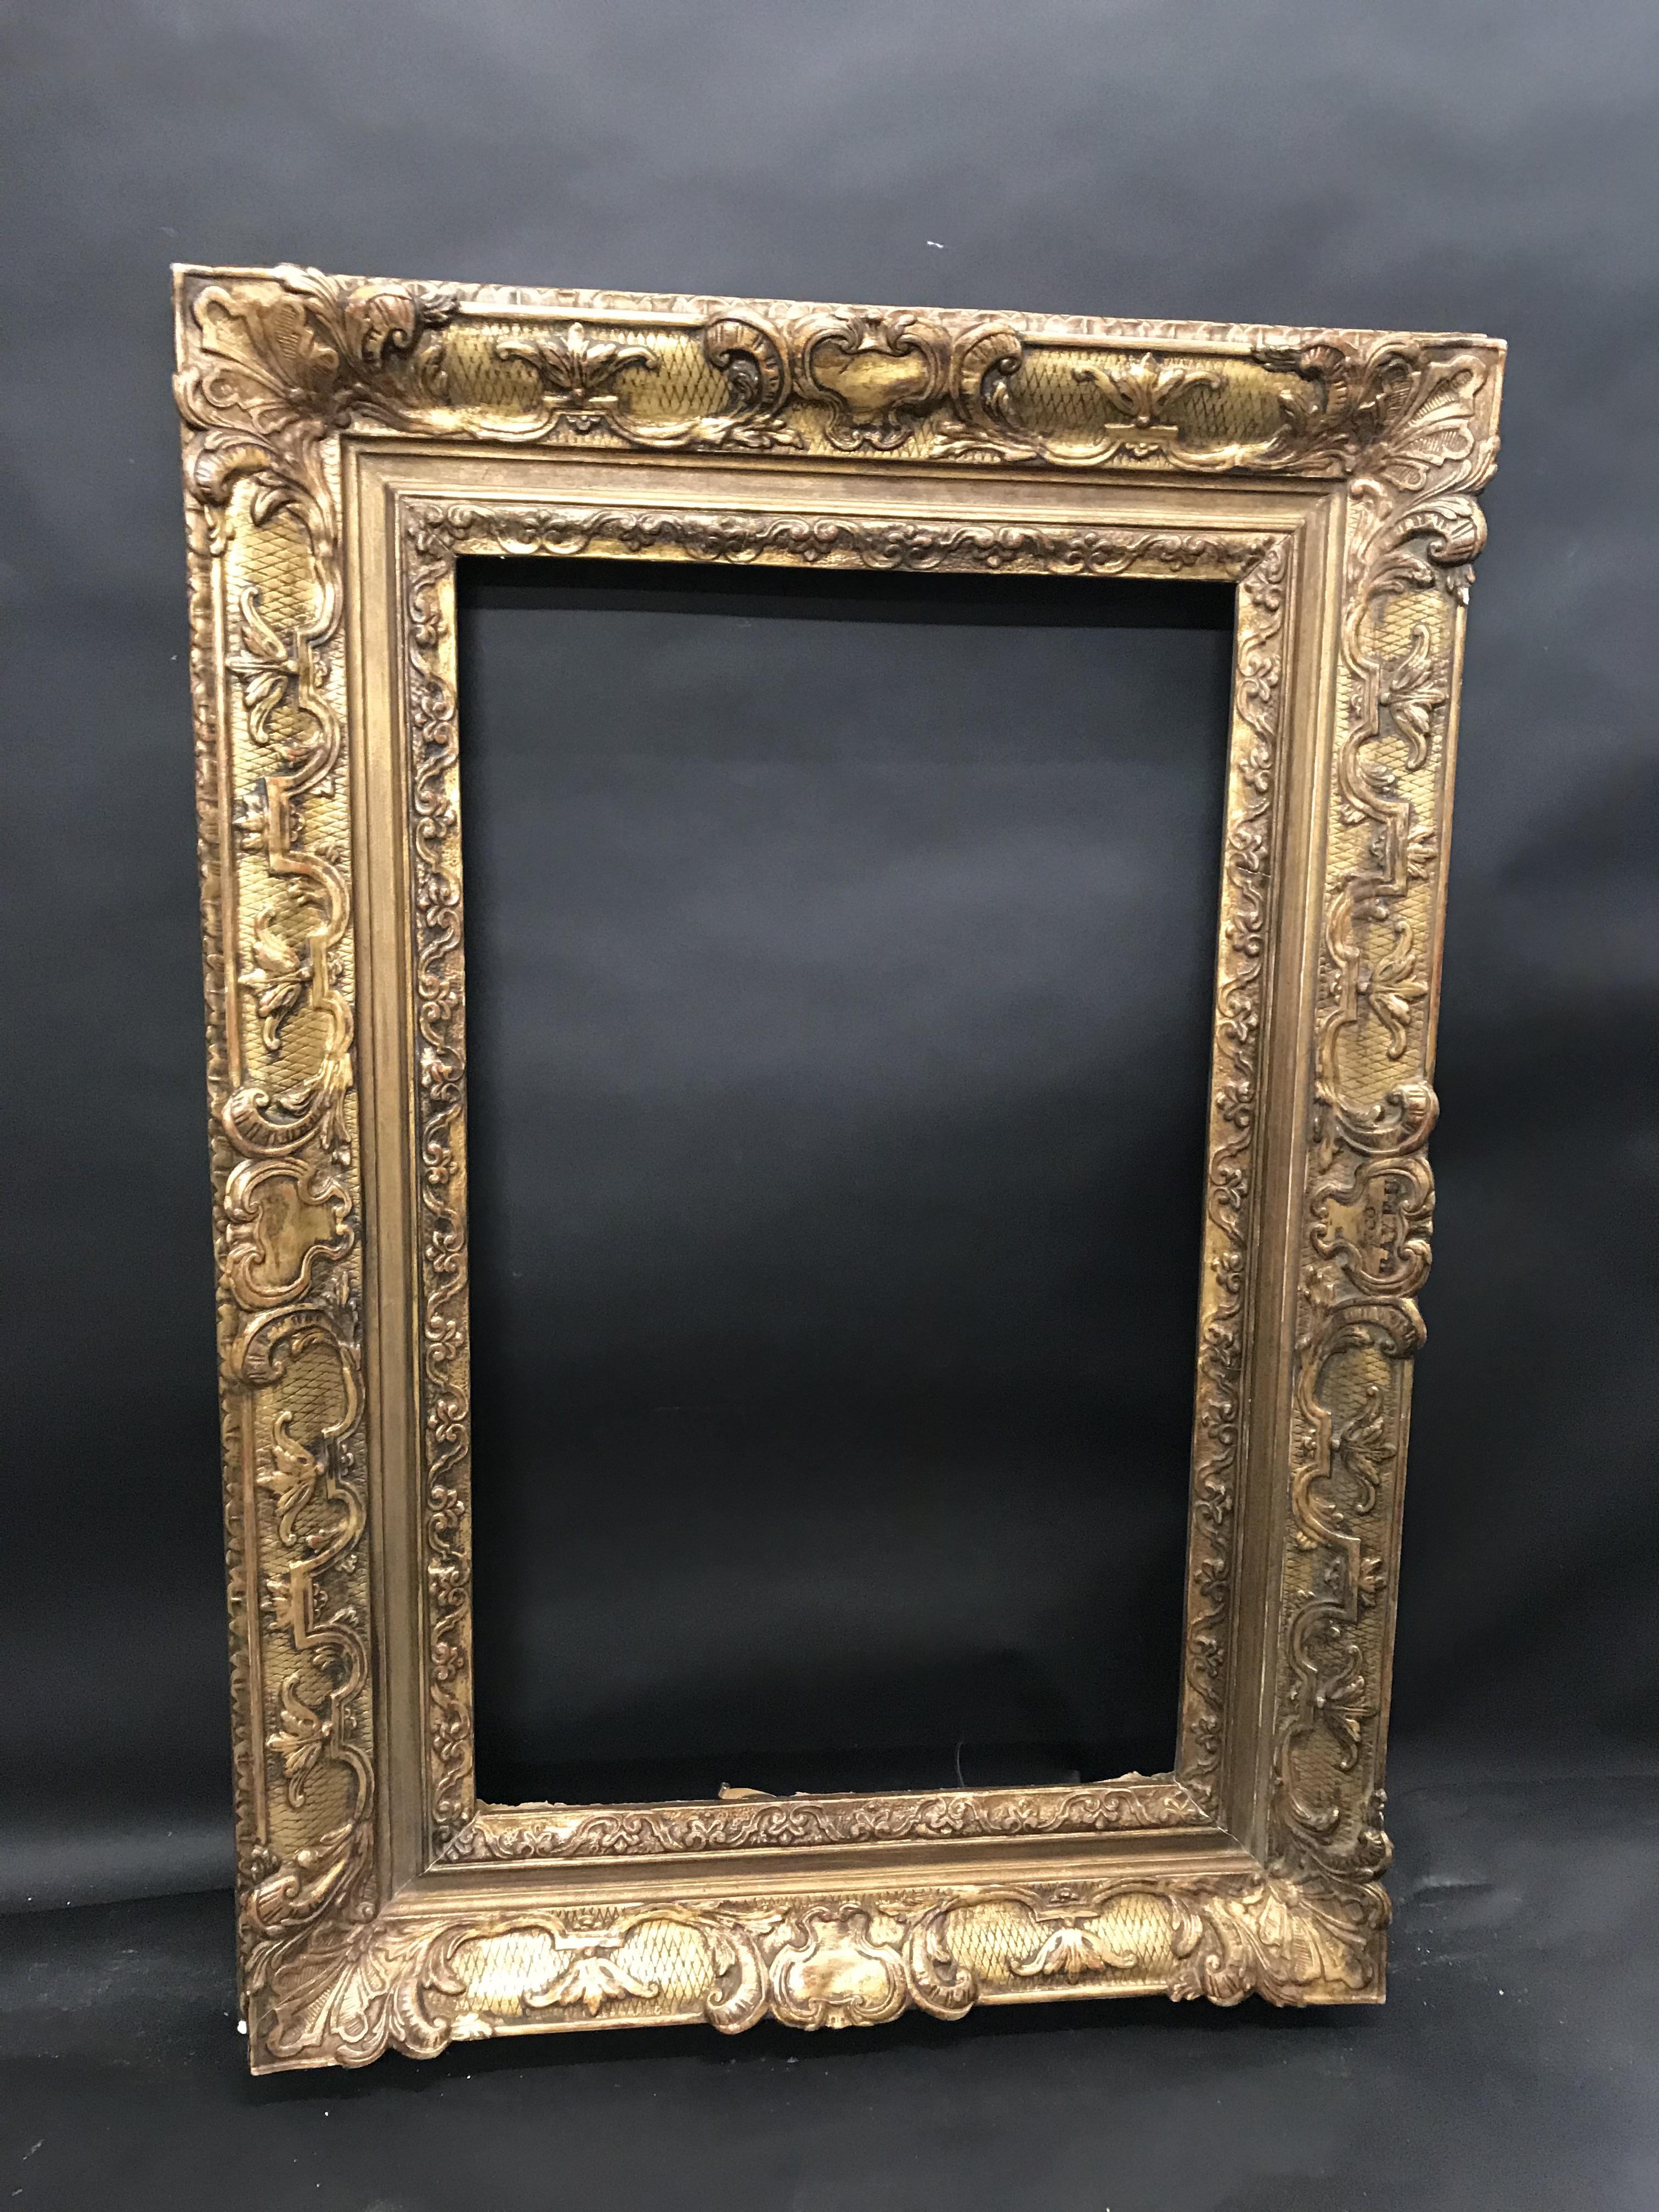 Early 20th Century Continental School. A Gilt Composition Frame, with Swept Centres and Corners, - Image 2 of 3